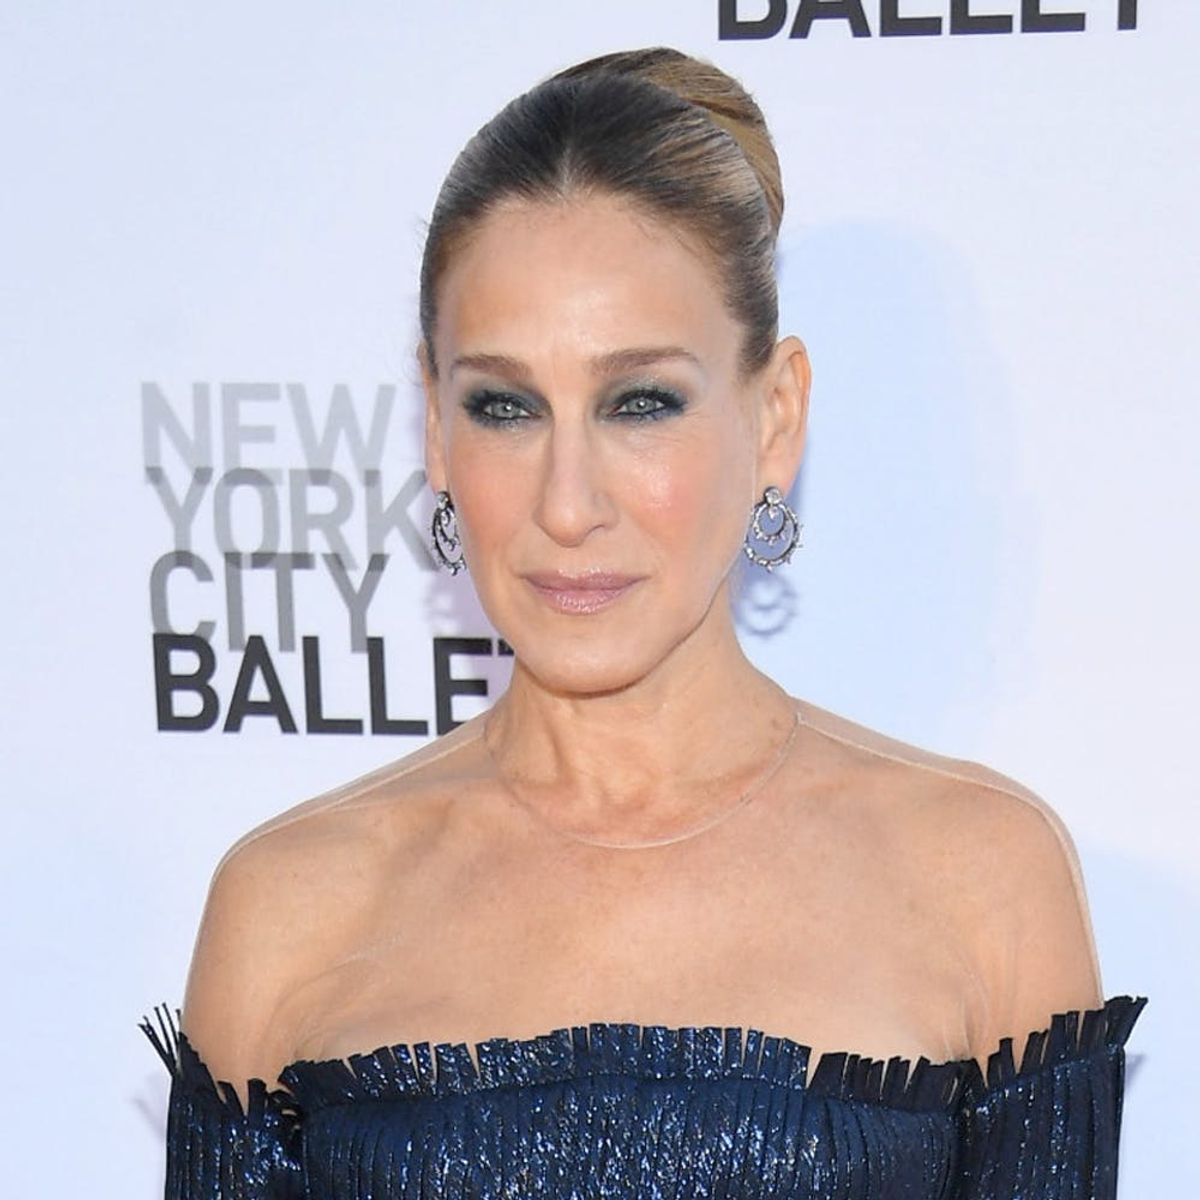 Sarah Jessica Parker and GILT Are Teaming Up to Make Affordable Wedding Dresses